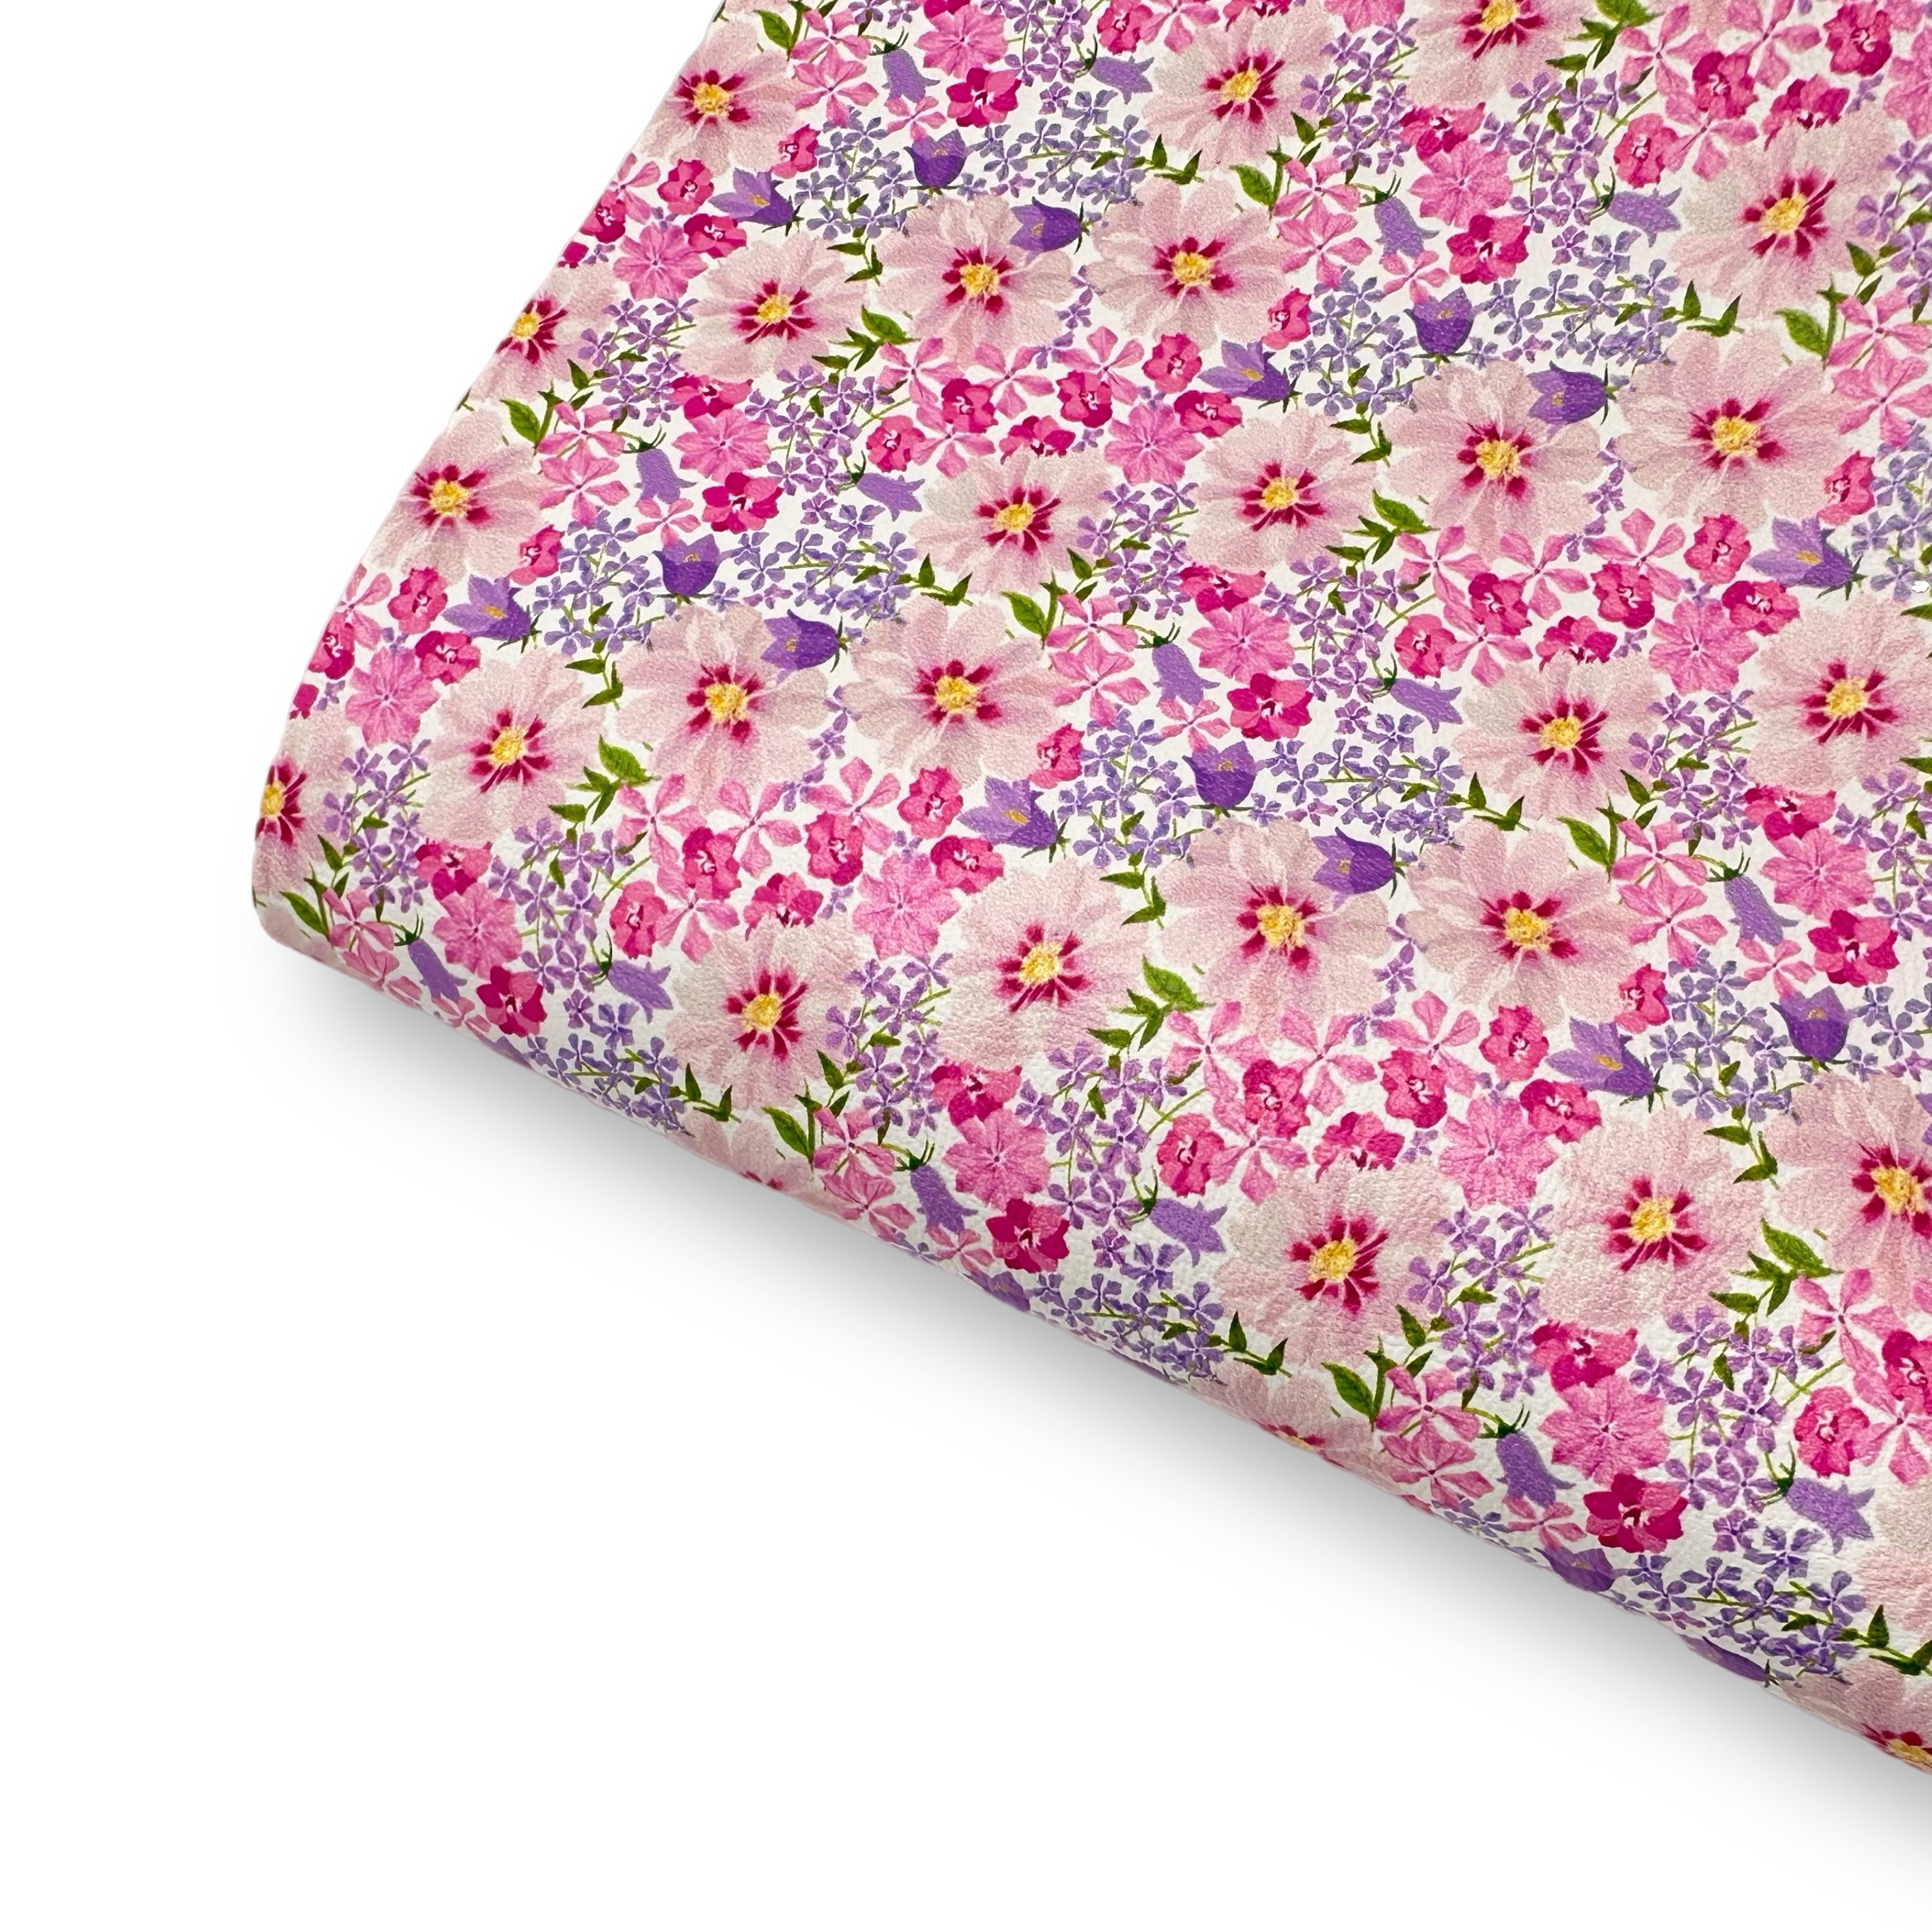 Lavender & Pink Blooms Premium Faux Leather Fabric